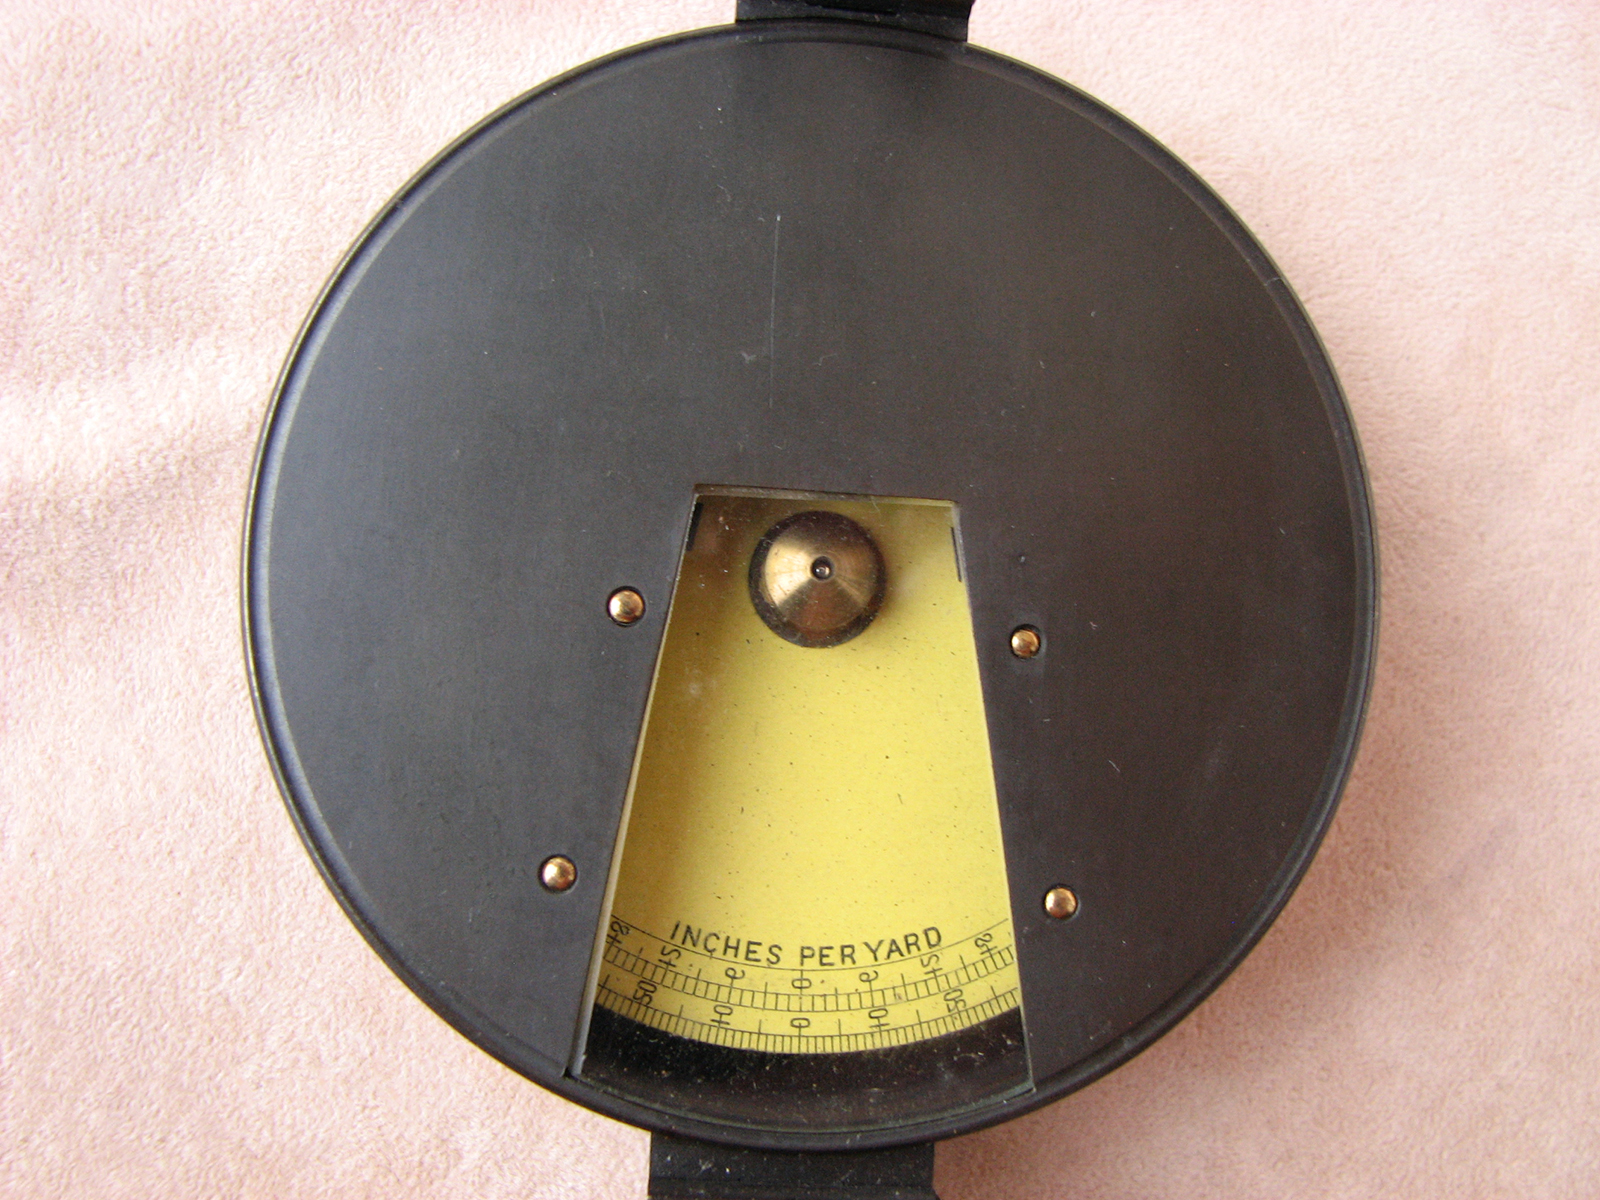 Prismatic inches per yard clinometer in fitted leather case